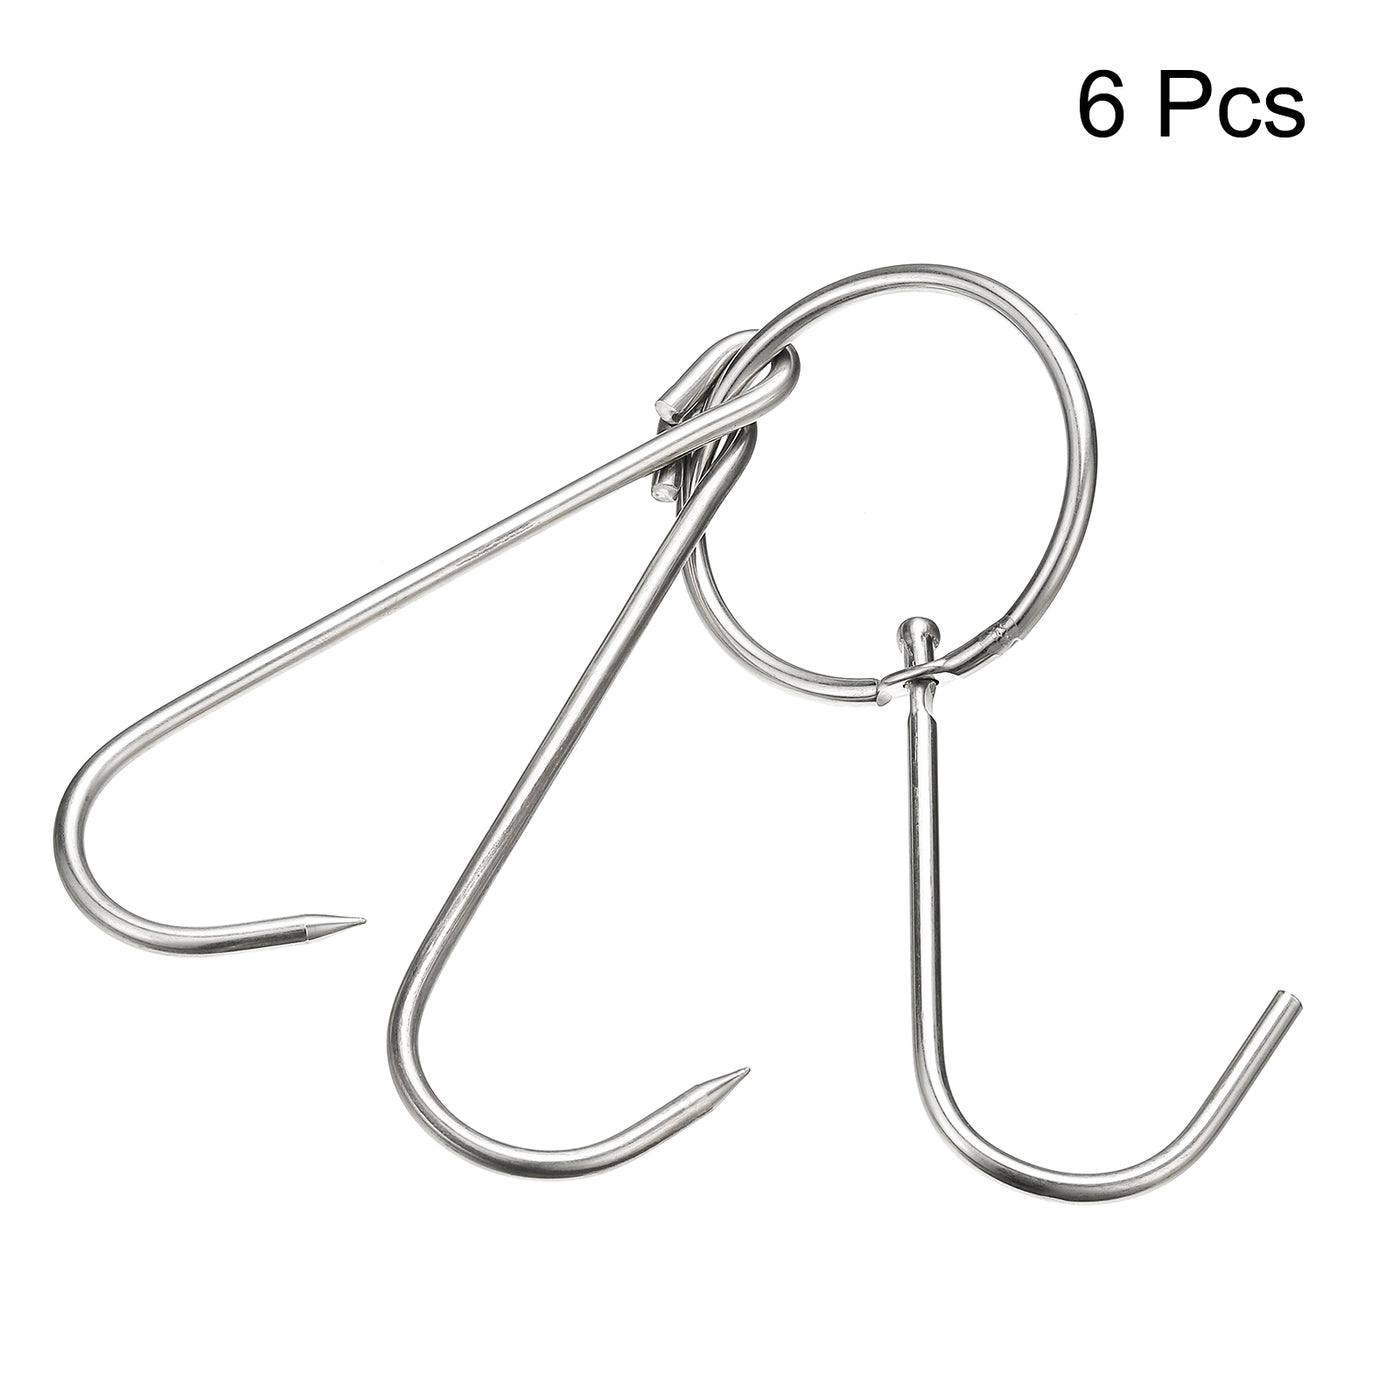 uxcell Uxcell Double Meat Hooks, Stainless Steel Smoker Hook Tools for Grill Cooking Fish Chicken